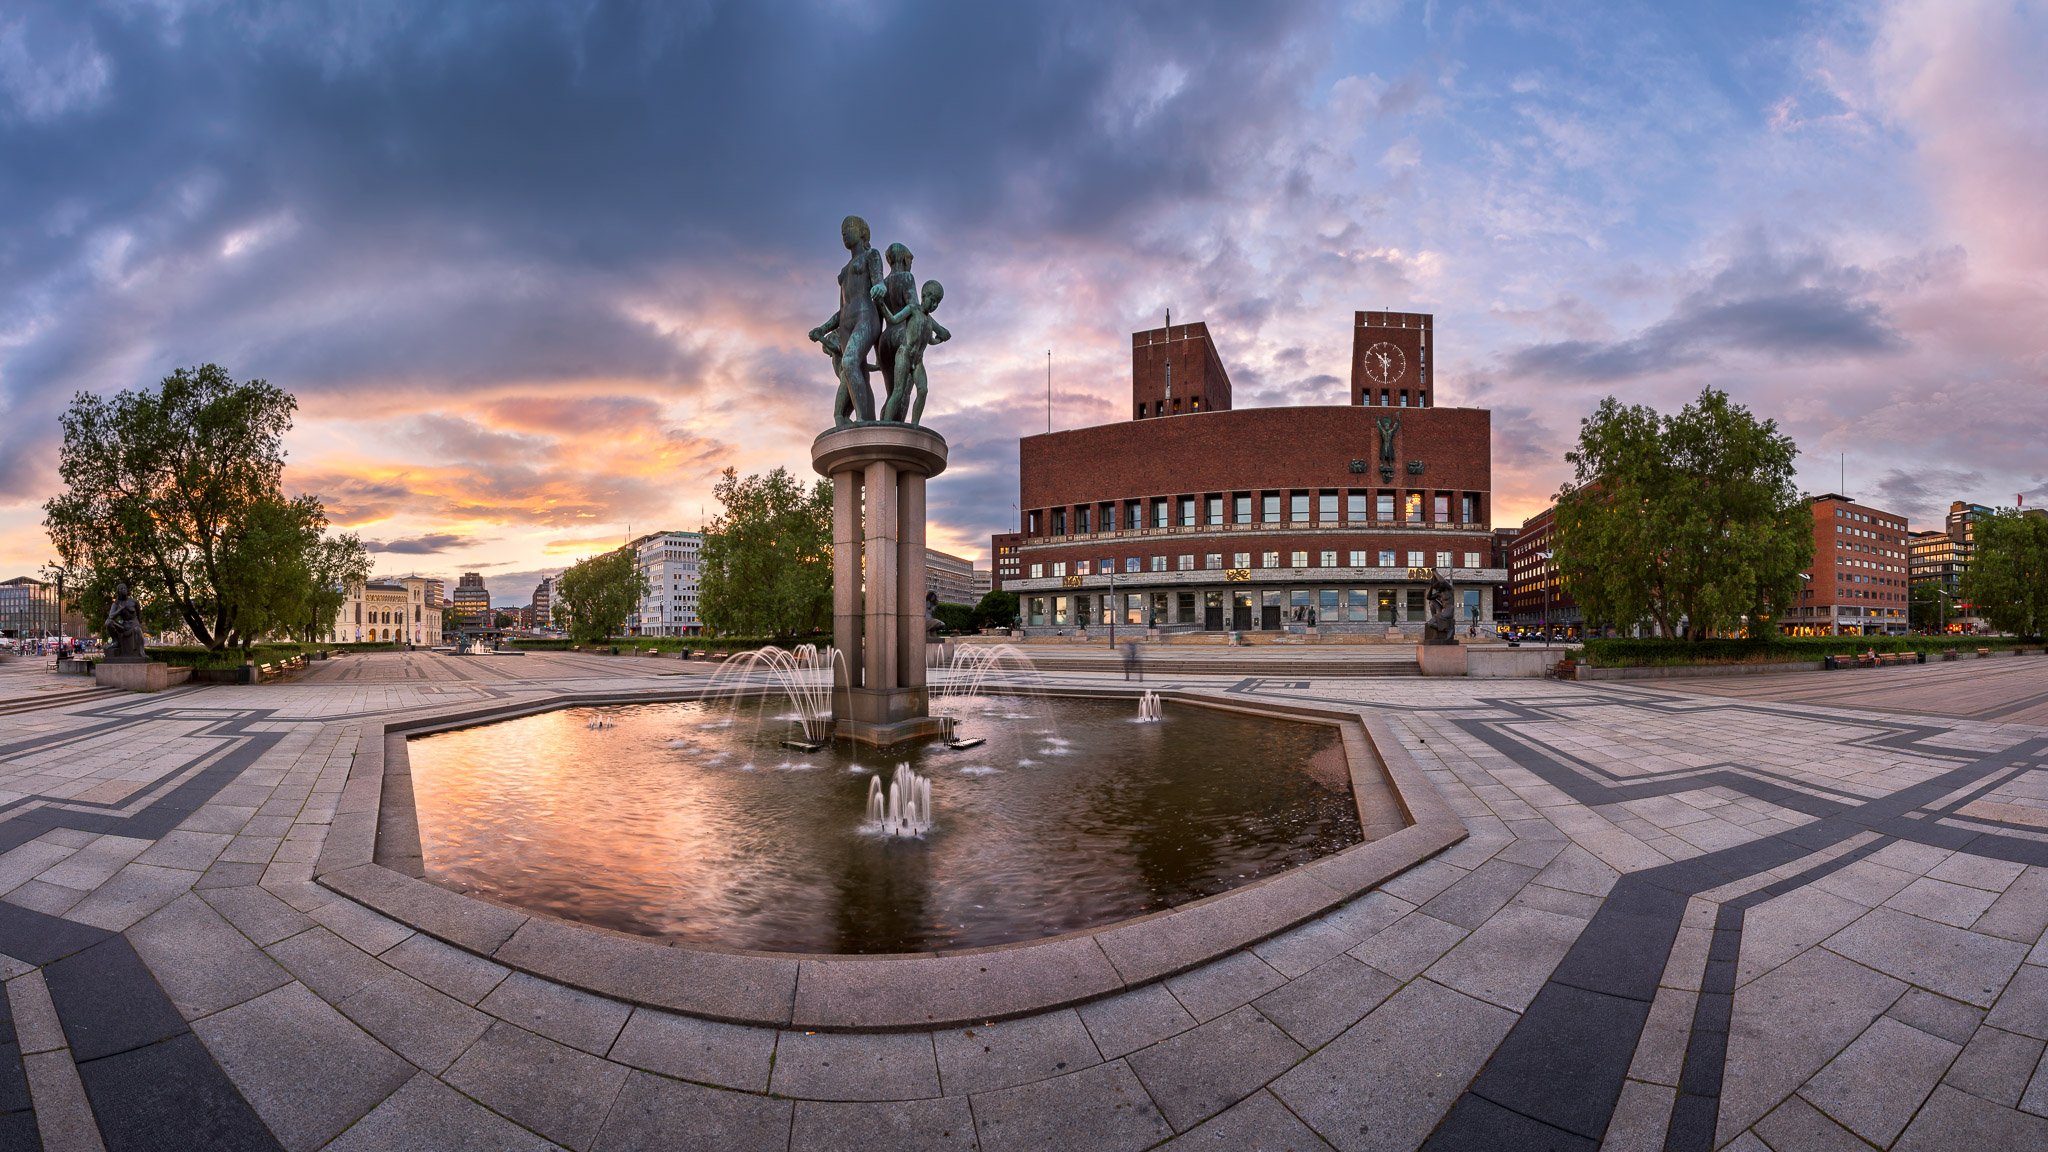 architecture, blue, building, capital, capitol, city, cityhall, cityscape, clock, dusk, europe, european, evening, exterior, facade, famous, fountain, guildhall, hall, history, iconic, illuminated, landmark, modern, nordic, norway, norwegian, oslo, outdoo, Andrey Omelyanchuk